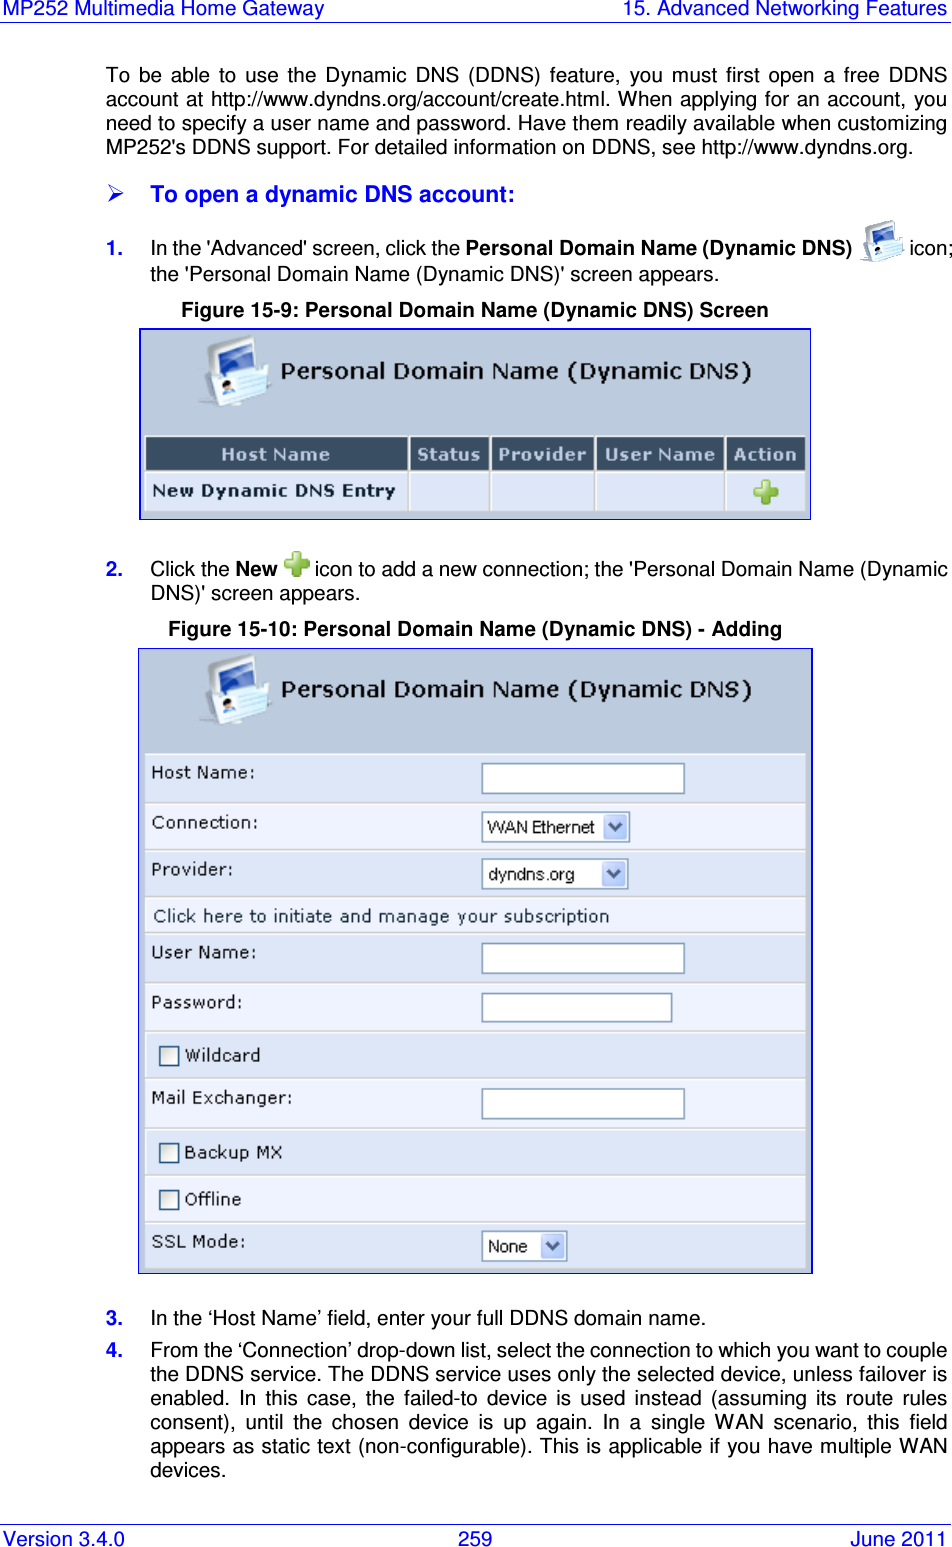 MP252 Multimedia Home Gateway  15. Advanced Networking Features Version 3.4.0  259  June 2011 To  be  able  to  use  the  Dynamic  DNS  (DDNS)  feature,  you  must  first  open  a  free  DDNS account at http://www.dyndns.org/account/create.html. When applying for an account, you need to specify a user name and password. Have them readily available when customizing MP252&apos;s DDNS support. For detailed information on DDNS, see http://www.dyndns.org.  To open a dynamic DNS account: 1.  In the &apos;Advanced&apos; screen, click the Personal Domain Name (Dynamic DNS)   icon; the &apos;Personal Domain Name (Dynamic DNS)&apos; screen appears. Figure 15-9: Personal Domain Name (Dynamic DNS) Screen  2.  Click the New   icon to add a new connection; the &apos;Personal Domain Name (Dynamic DNS)&apos; screen appears. Figure 15-10: Personal Domain Name (Dynamic DNS) - Adding  3.  In the ‘Host Name’ field, enter your full DDNS domain name. 4.  From the ‘Connection’ drop-down list, select the connection to which you want to couple the DDNS service. The DDNS service uses only the selected device, unless failover is enabled.  In  this  case,  the  failed-to  device  is  used  instead  (assuming  its  route  rules consent),  until  the  chosen  device  is  up  again.  In  a  single  WAN  scenario,  this  field appears as static text (non-configurable). This is applicable if you have multiple WAN devices.  